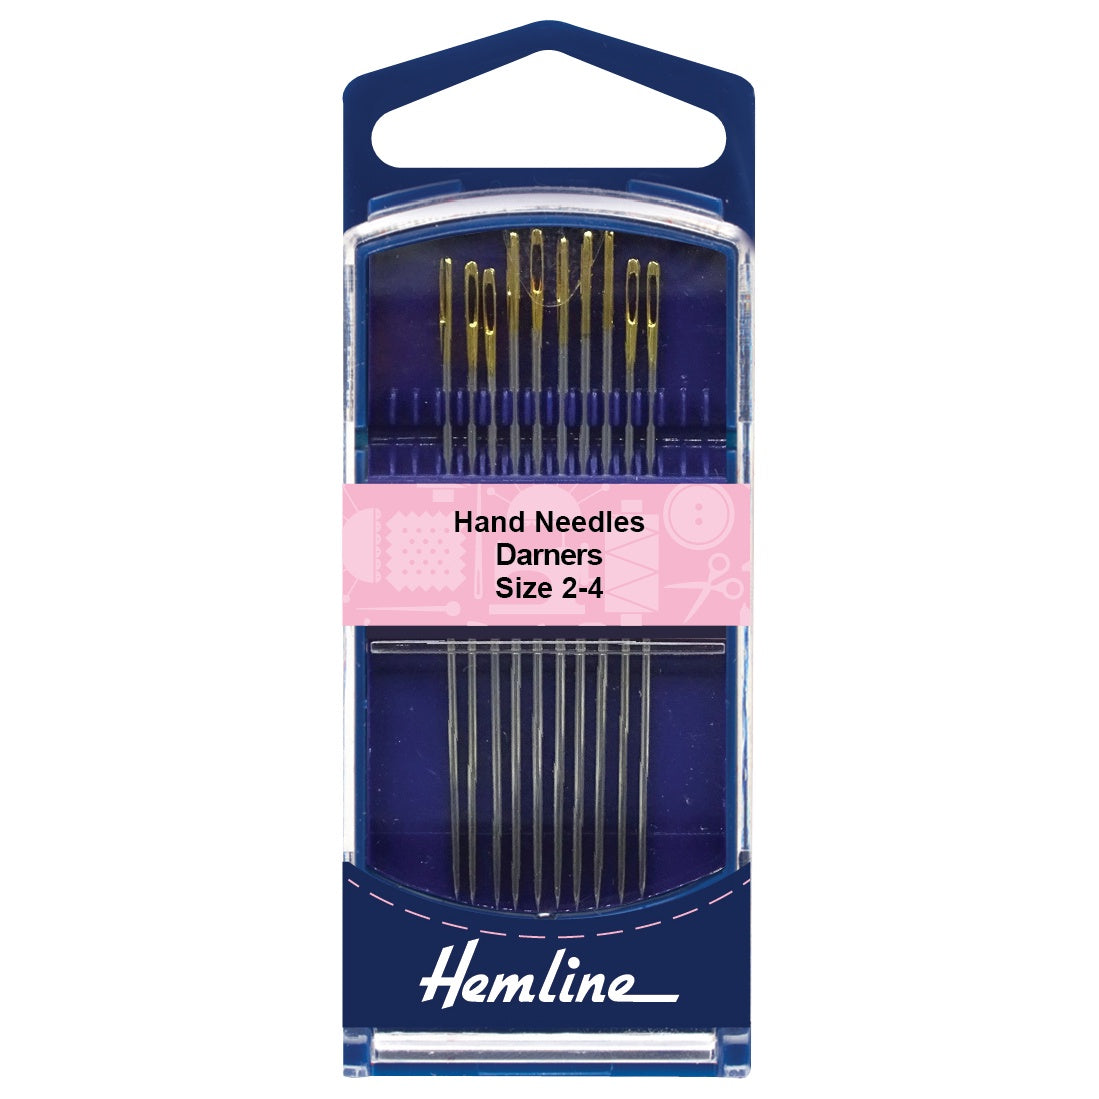 HAND NEEDLES - DARNERS - Size 2-4 - 10 Pieces